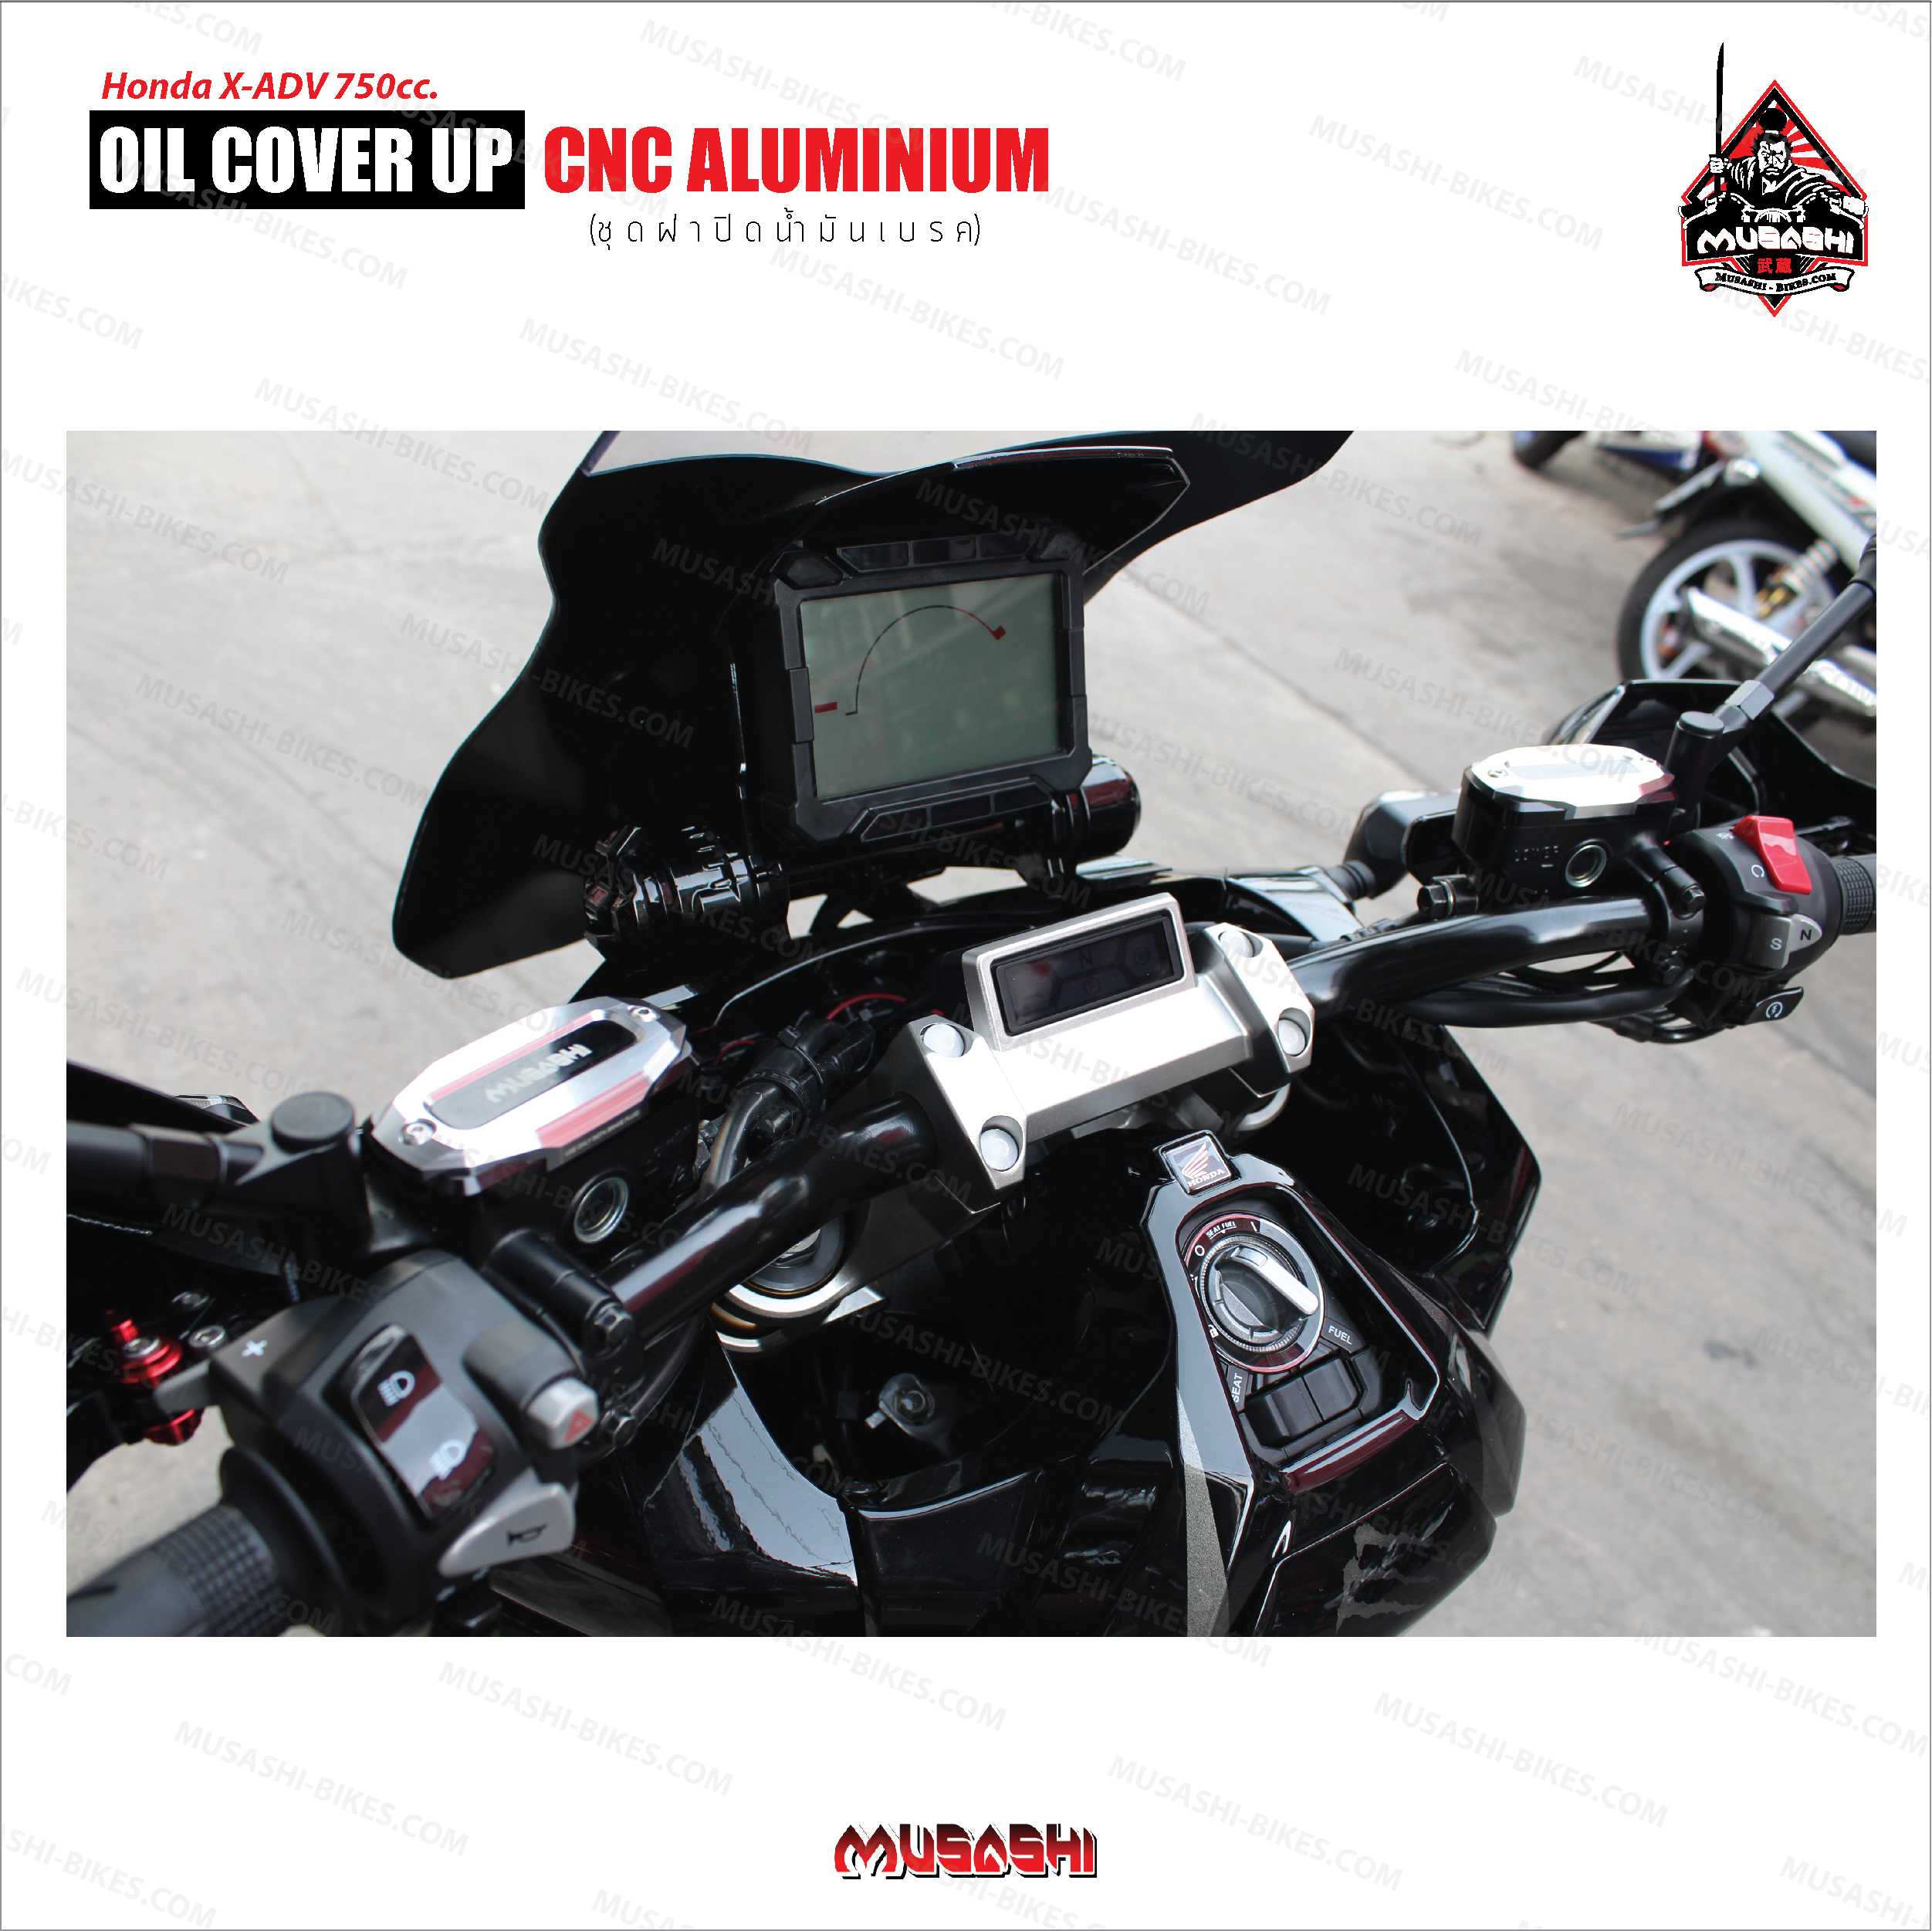 Oil Cover Up - Africa Twin